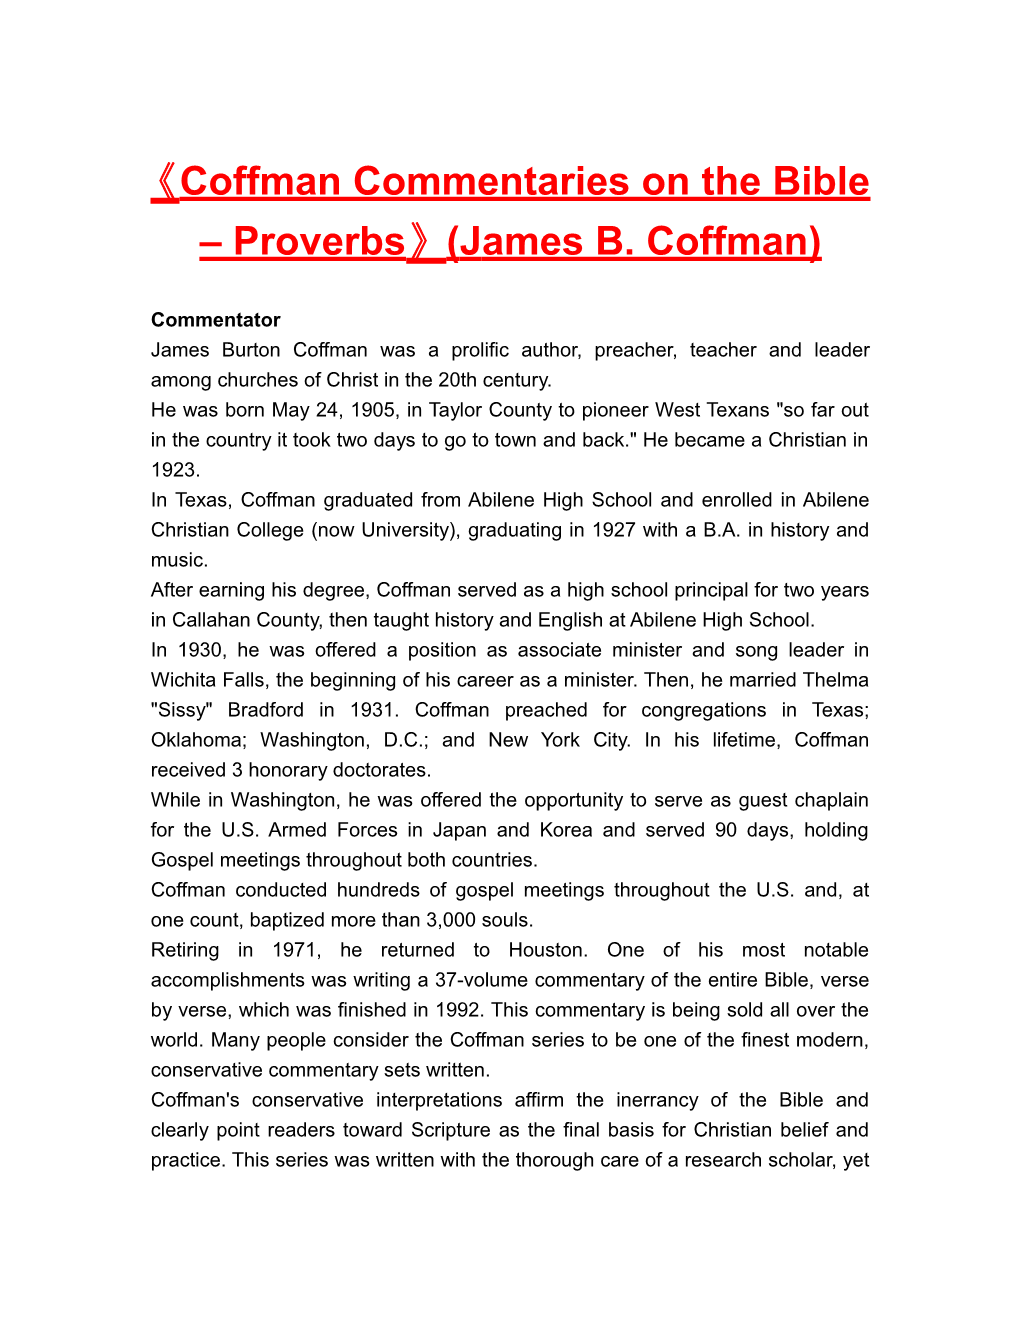 Coffman Commentaries on the Bible Proverbs (James B. Coffman)